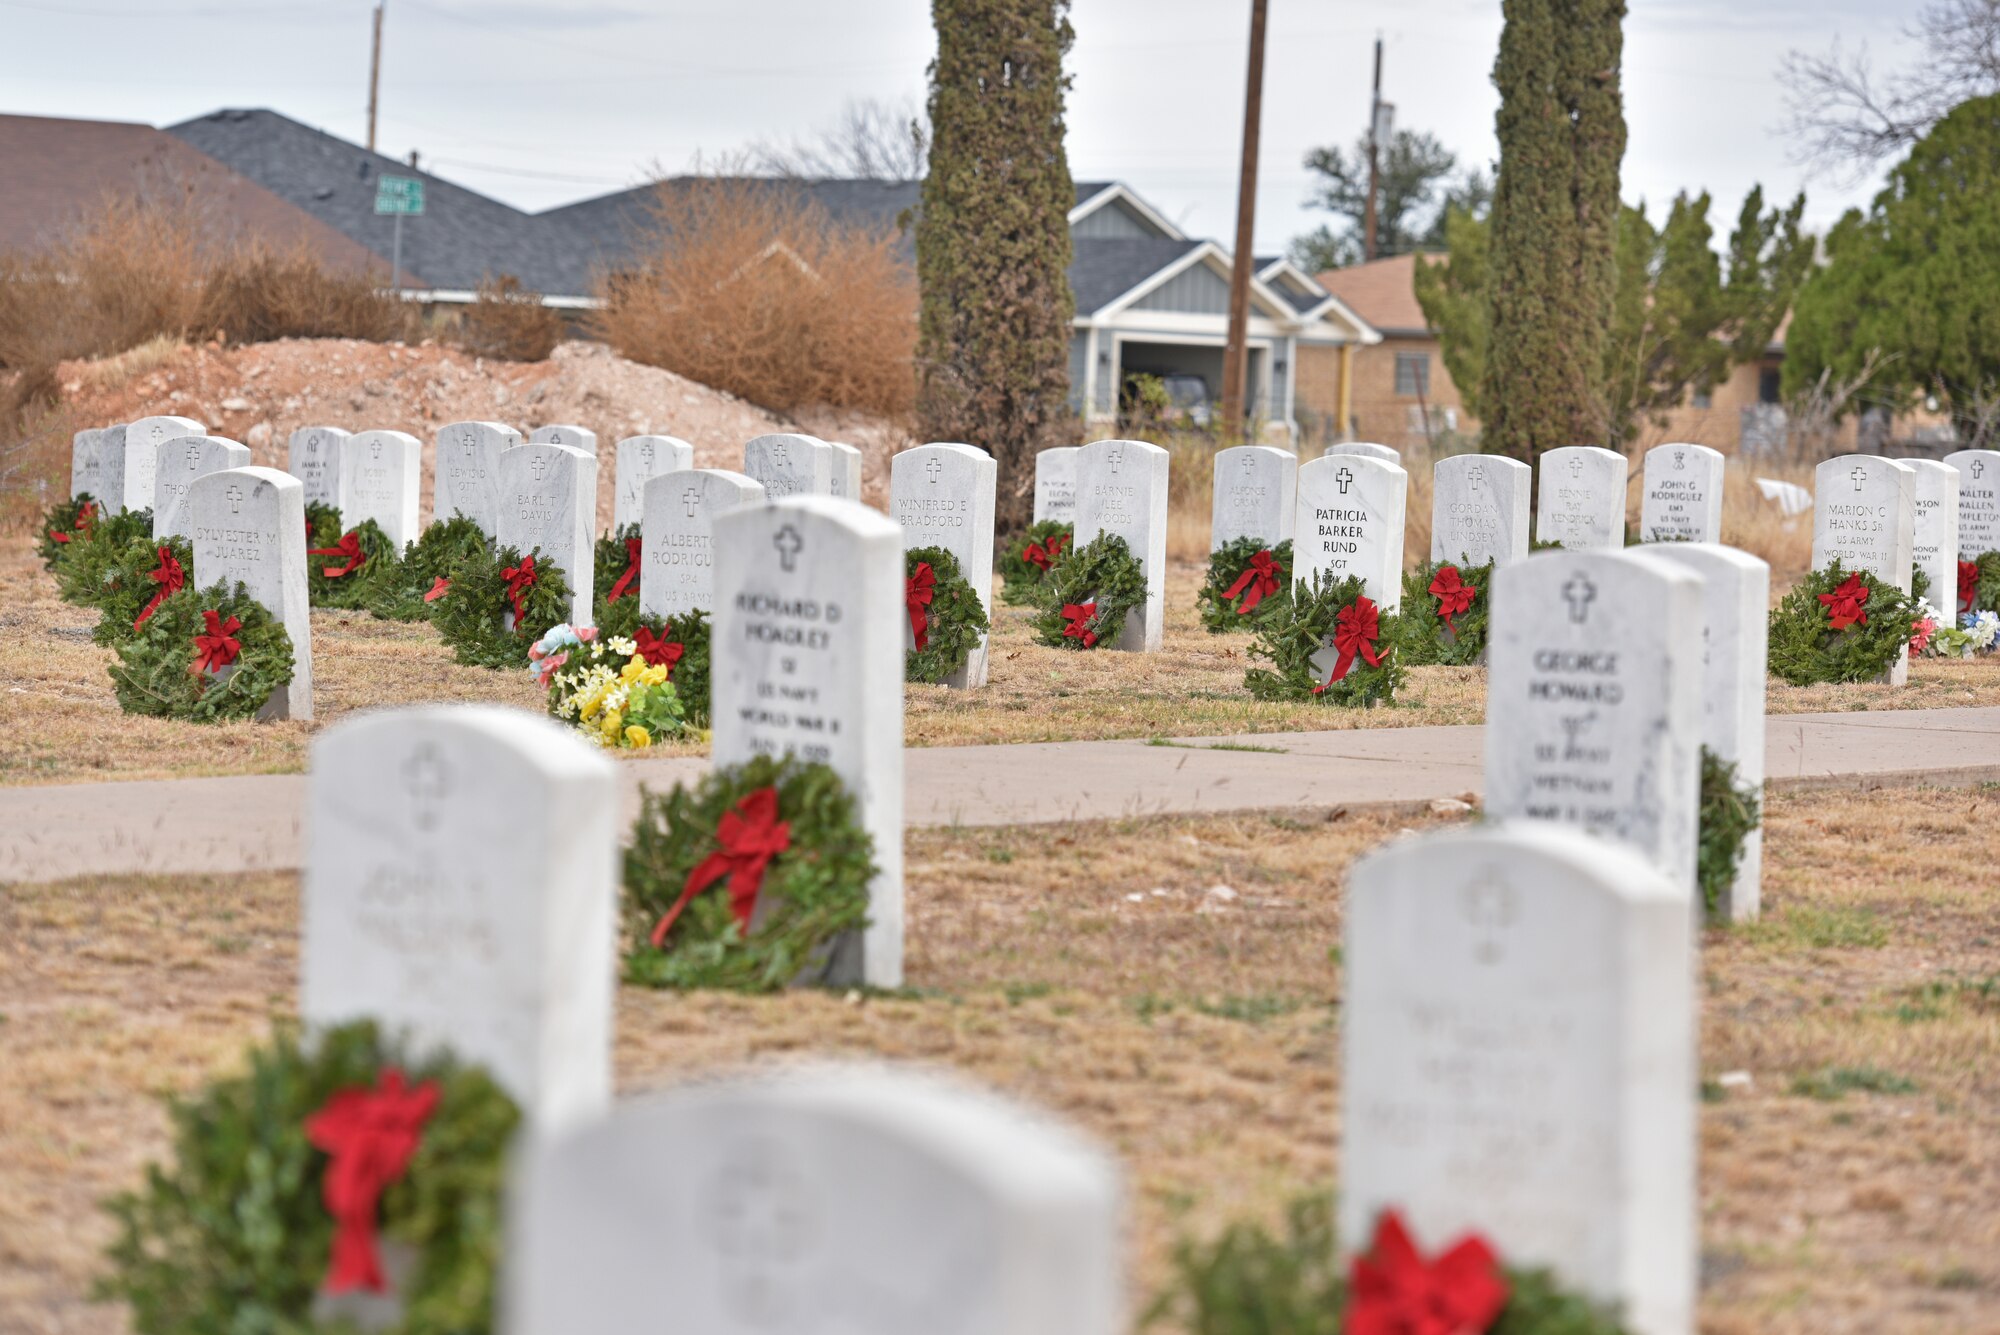 Graves are adorned with wreaths during the Wreaths Across America ceremony at Belvedere Memorial Park Cemetery in San Angelo, Texas, Dec. 18, 2021. Wreaths Across America’s mission is to remember, honor and teach by coordinating wreath-laying ceremonies at Arlington National Cemetery as well as more than 1,600 additional locations in all 50 states, at sea and abroad. (U.S. Air Force photo by Senior Airman Ashley Thrash)